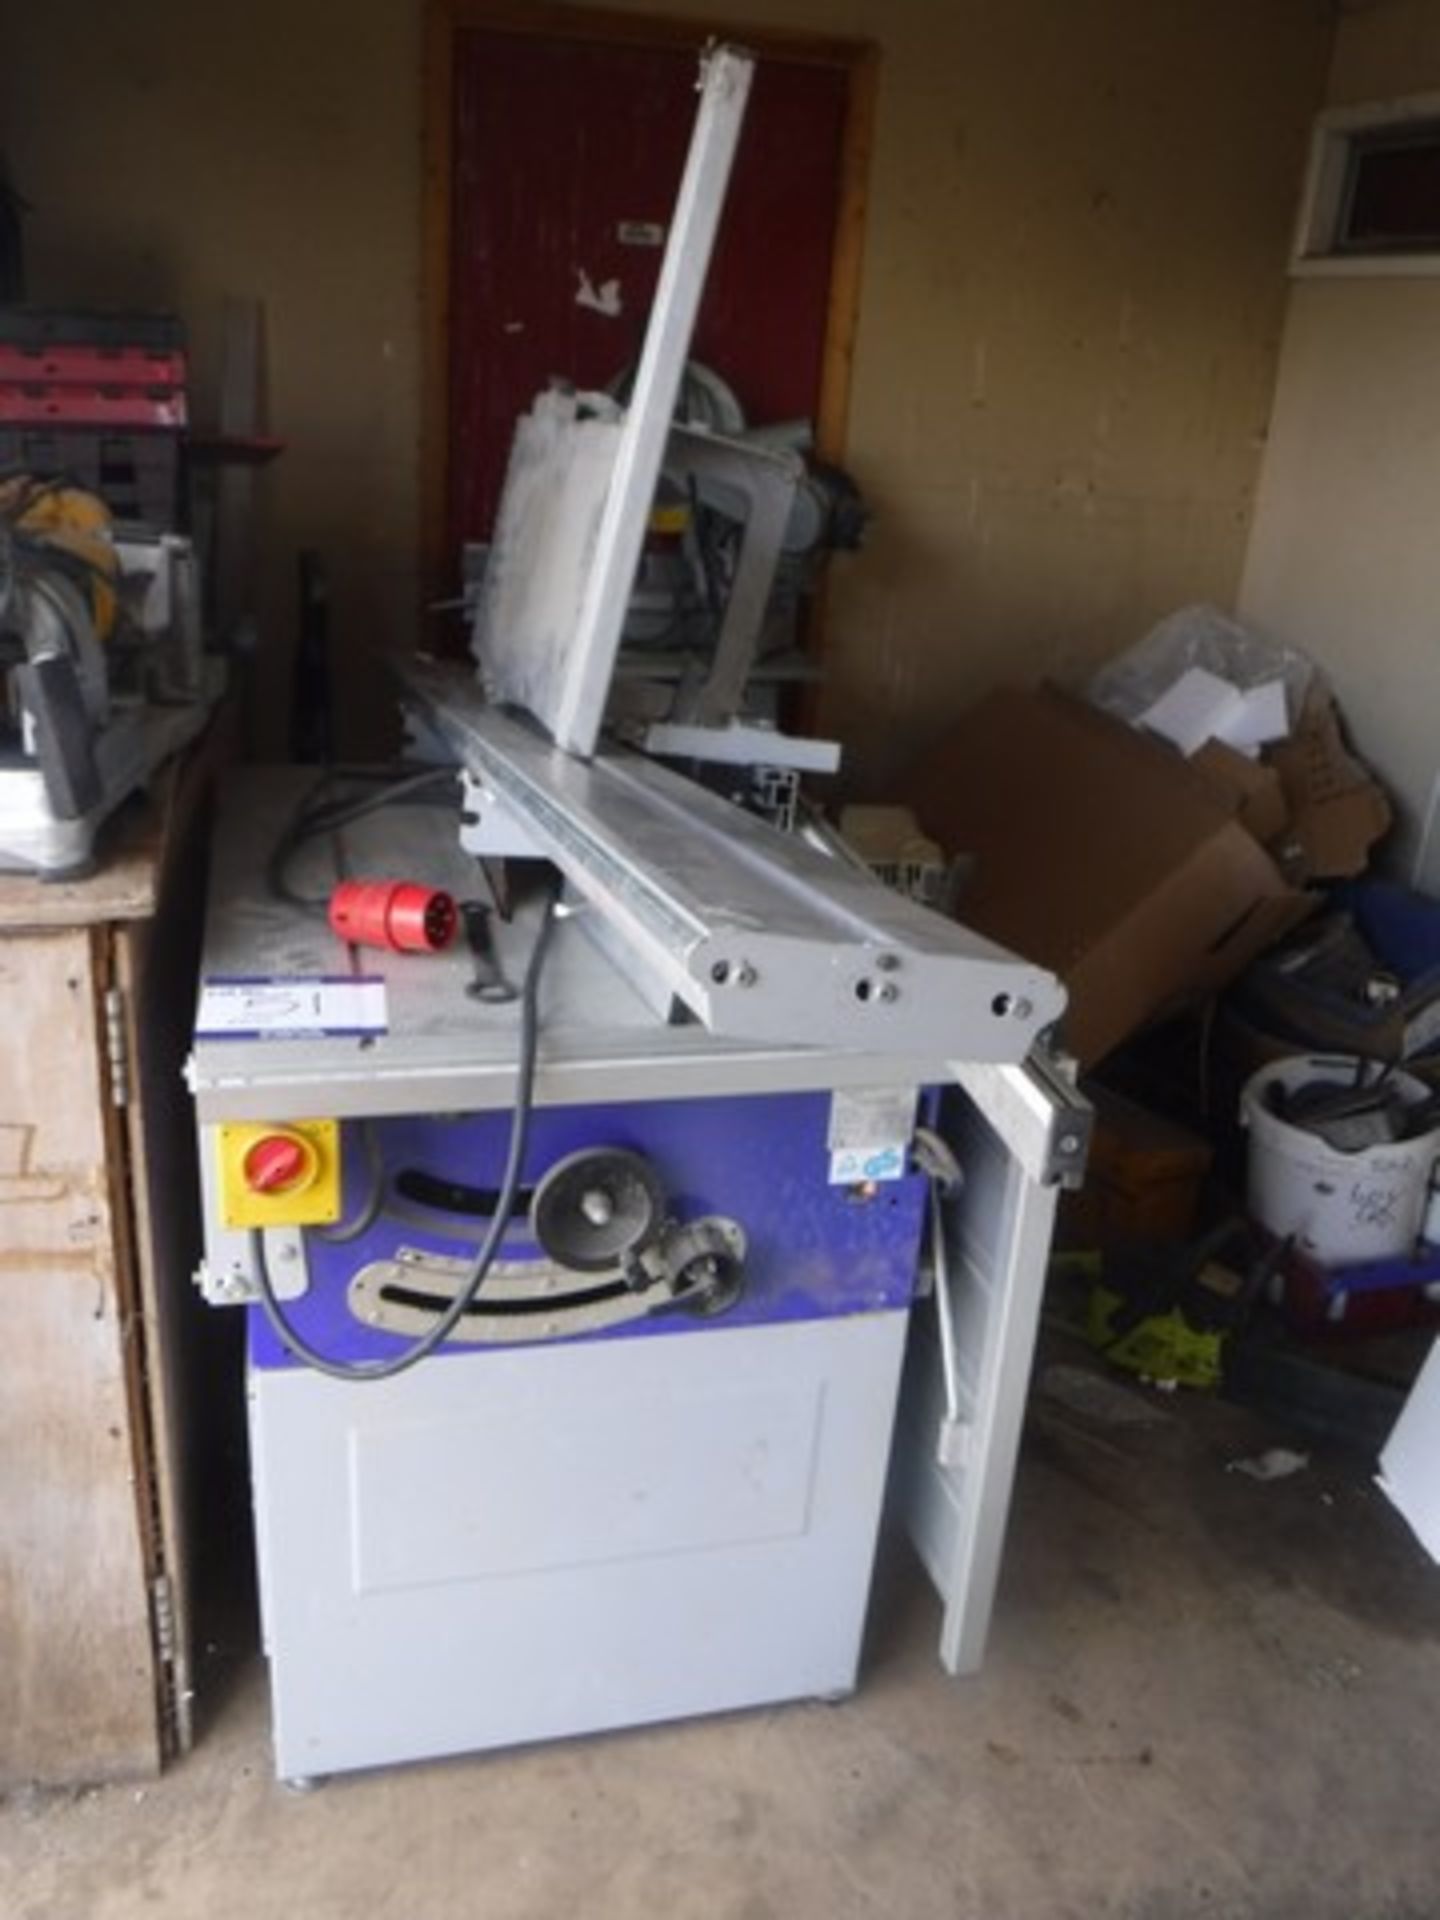 Table saw 3phase with all runners